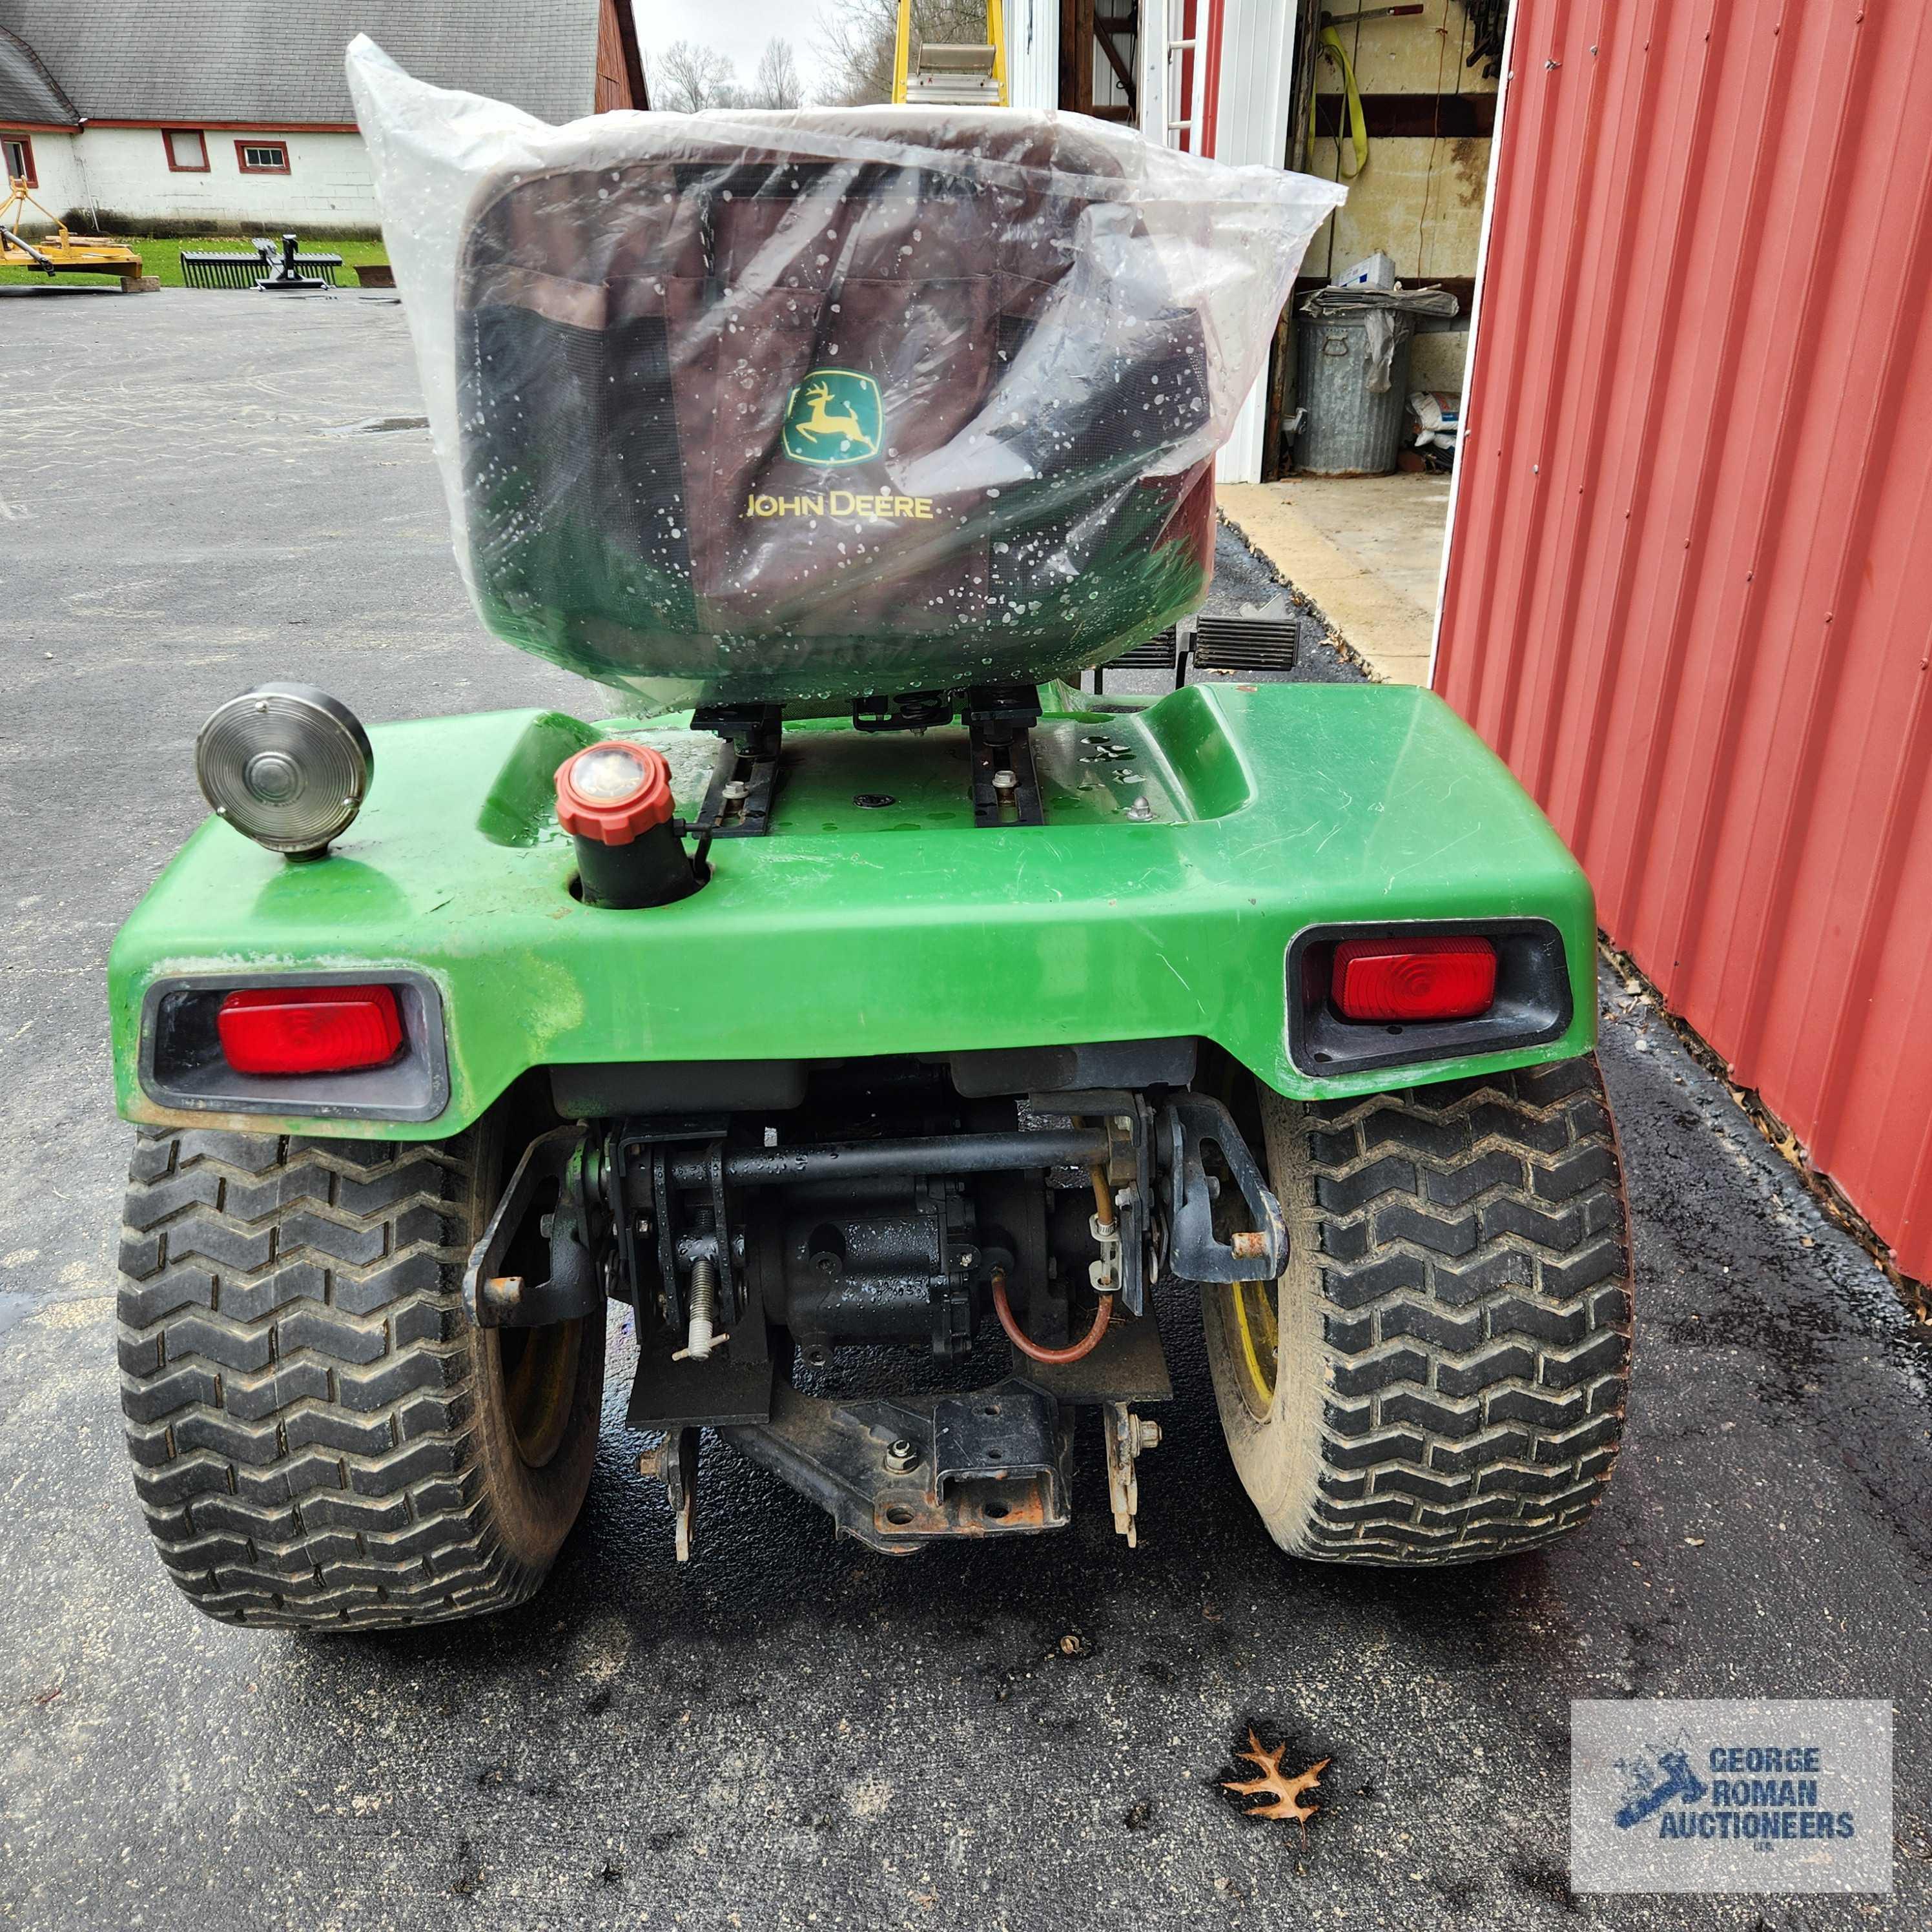 John Deere 332 diesel riding mower. 03630 hours with 52-inch deck and bagger system with blower.